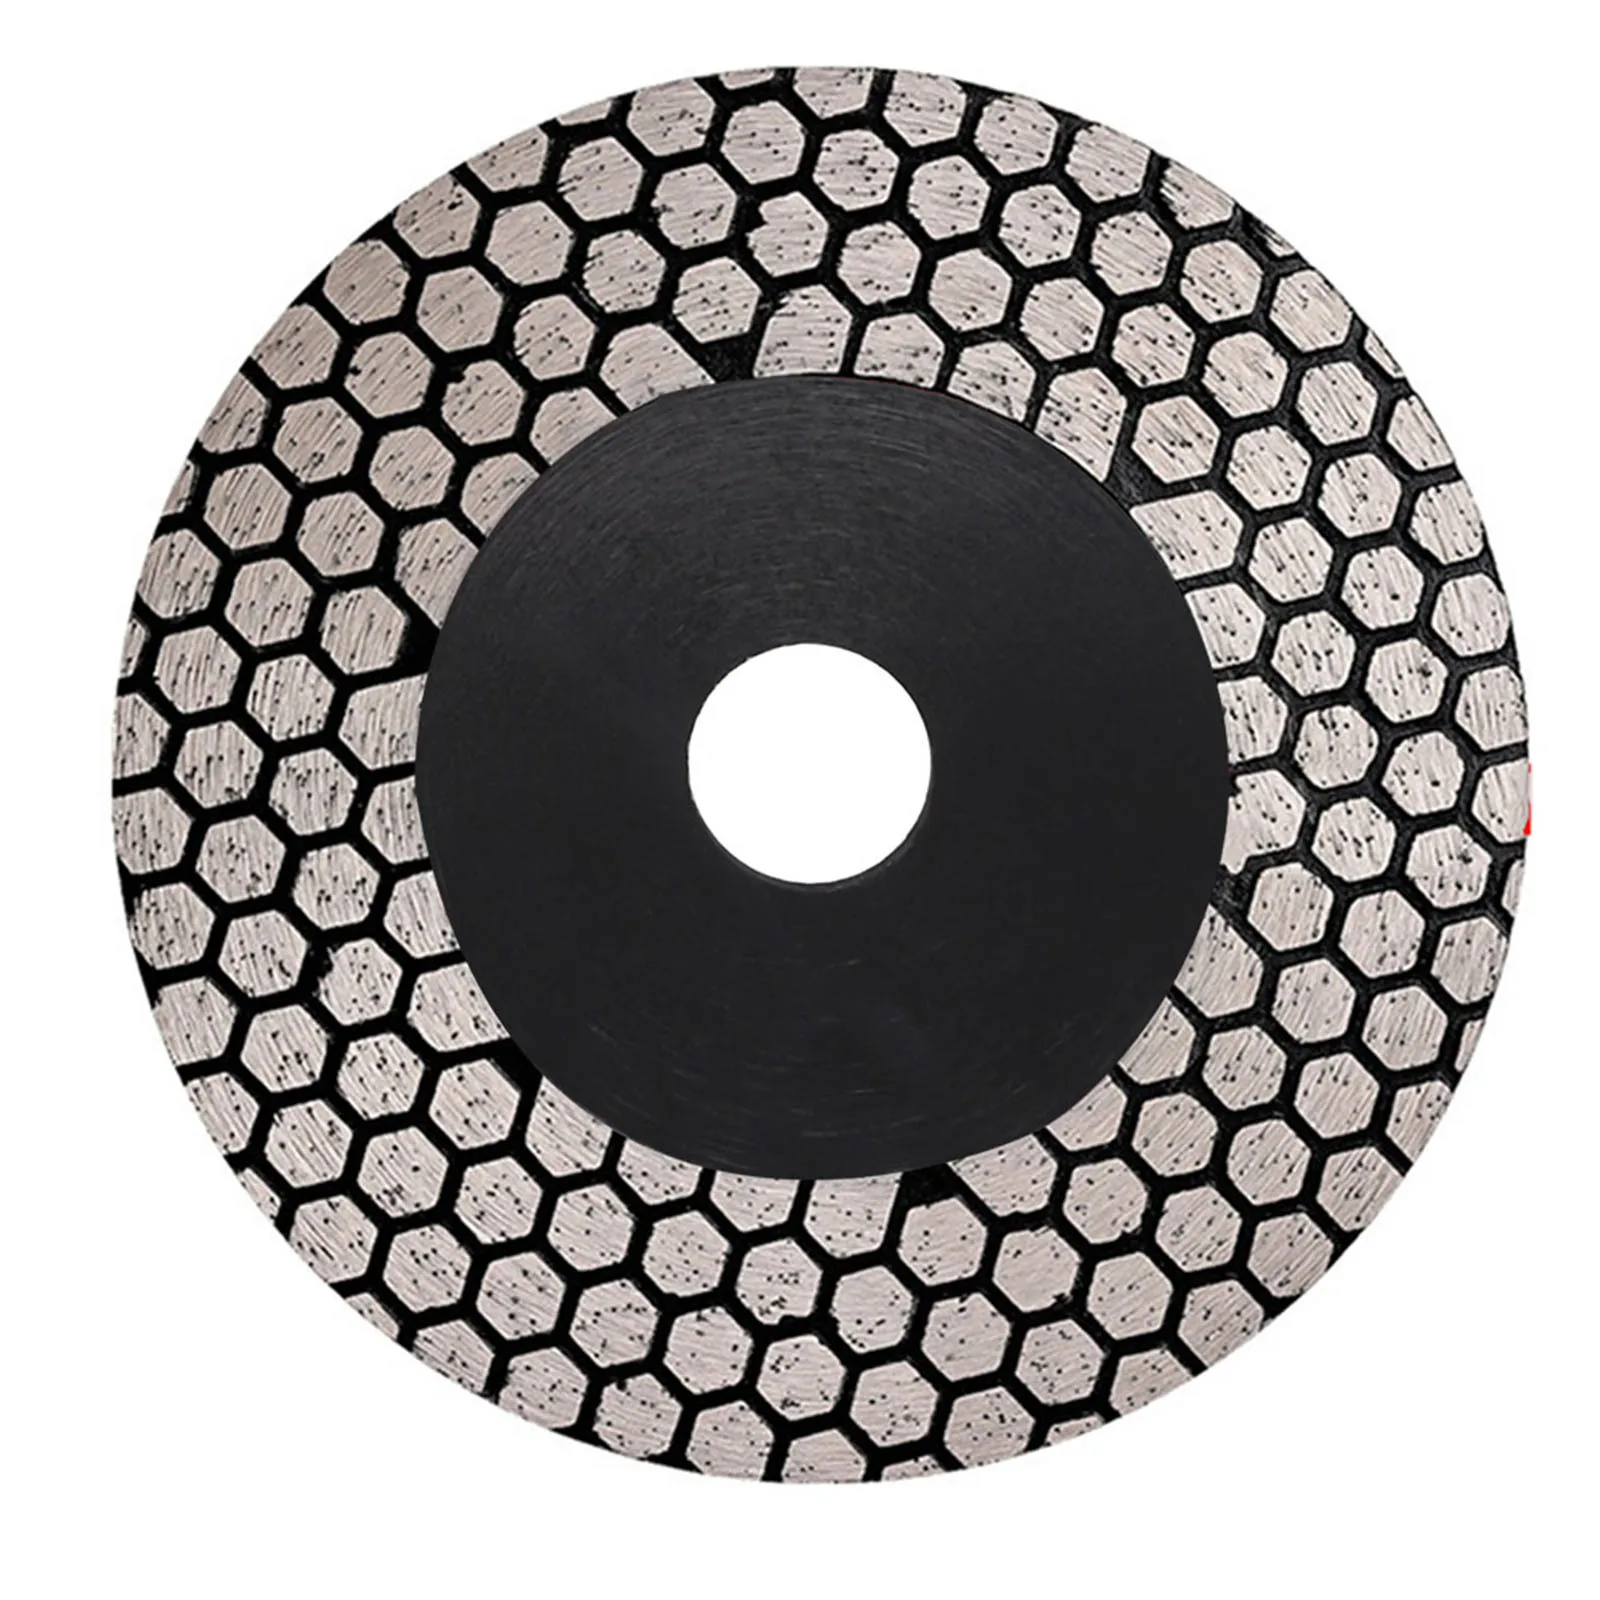 

Better Toughness Saw Blade Grind Edges Grooves Horizontally 13200RPM 1Pcs Cut At An Angle Cut In Straight Line